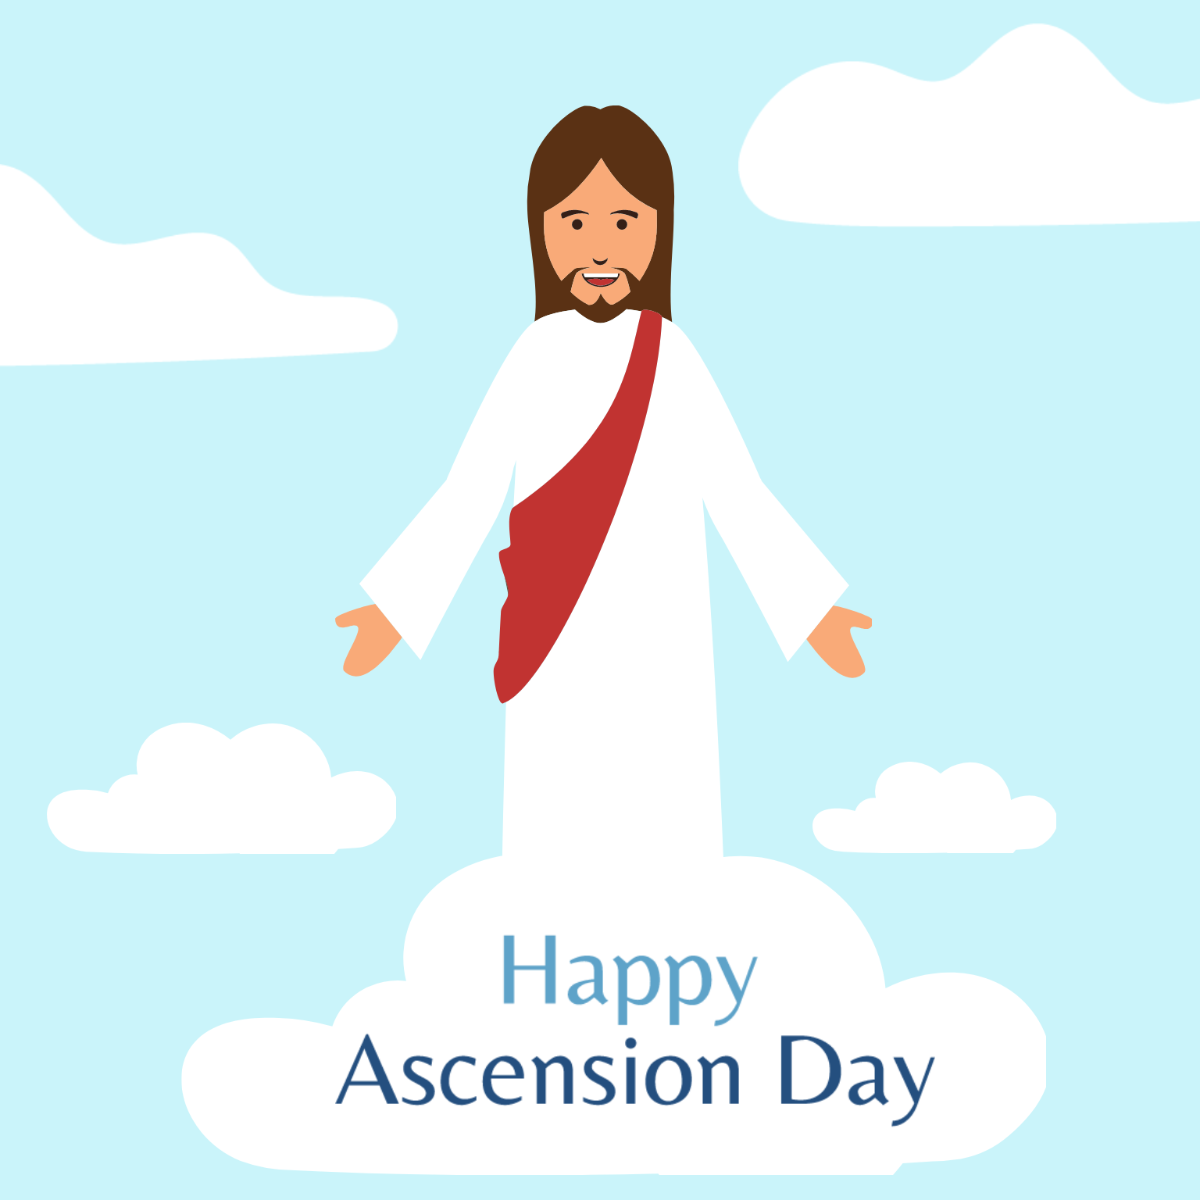 Happy Ascension Day Illustration Template